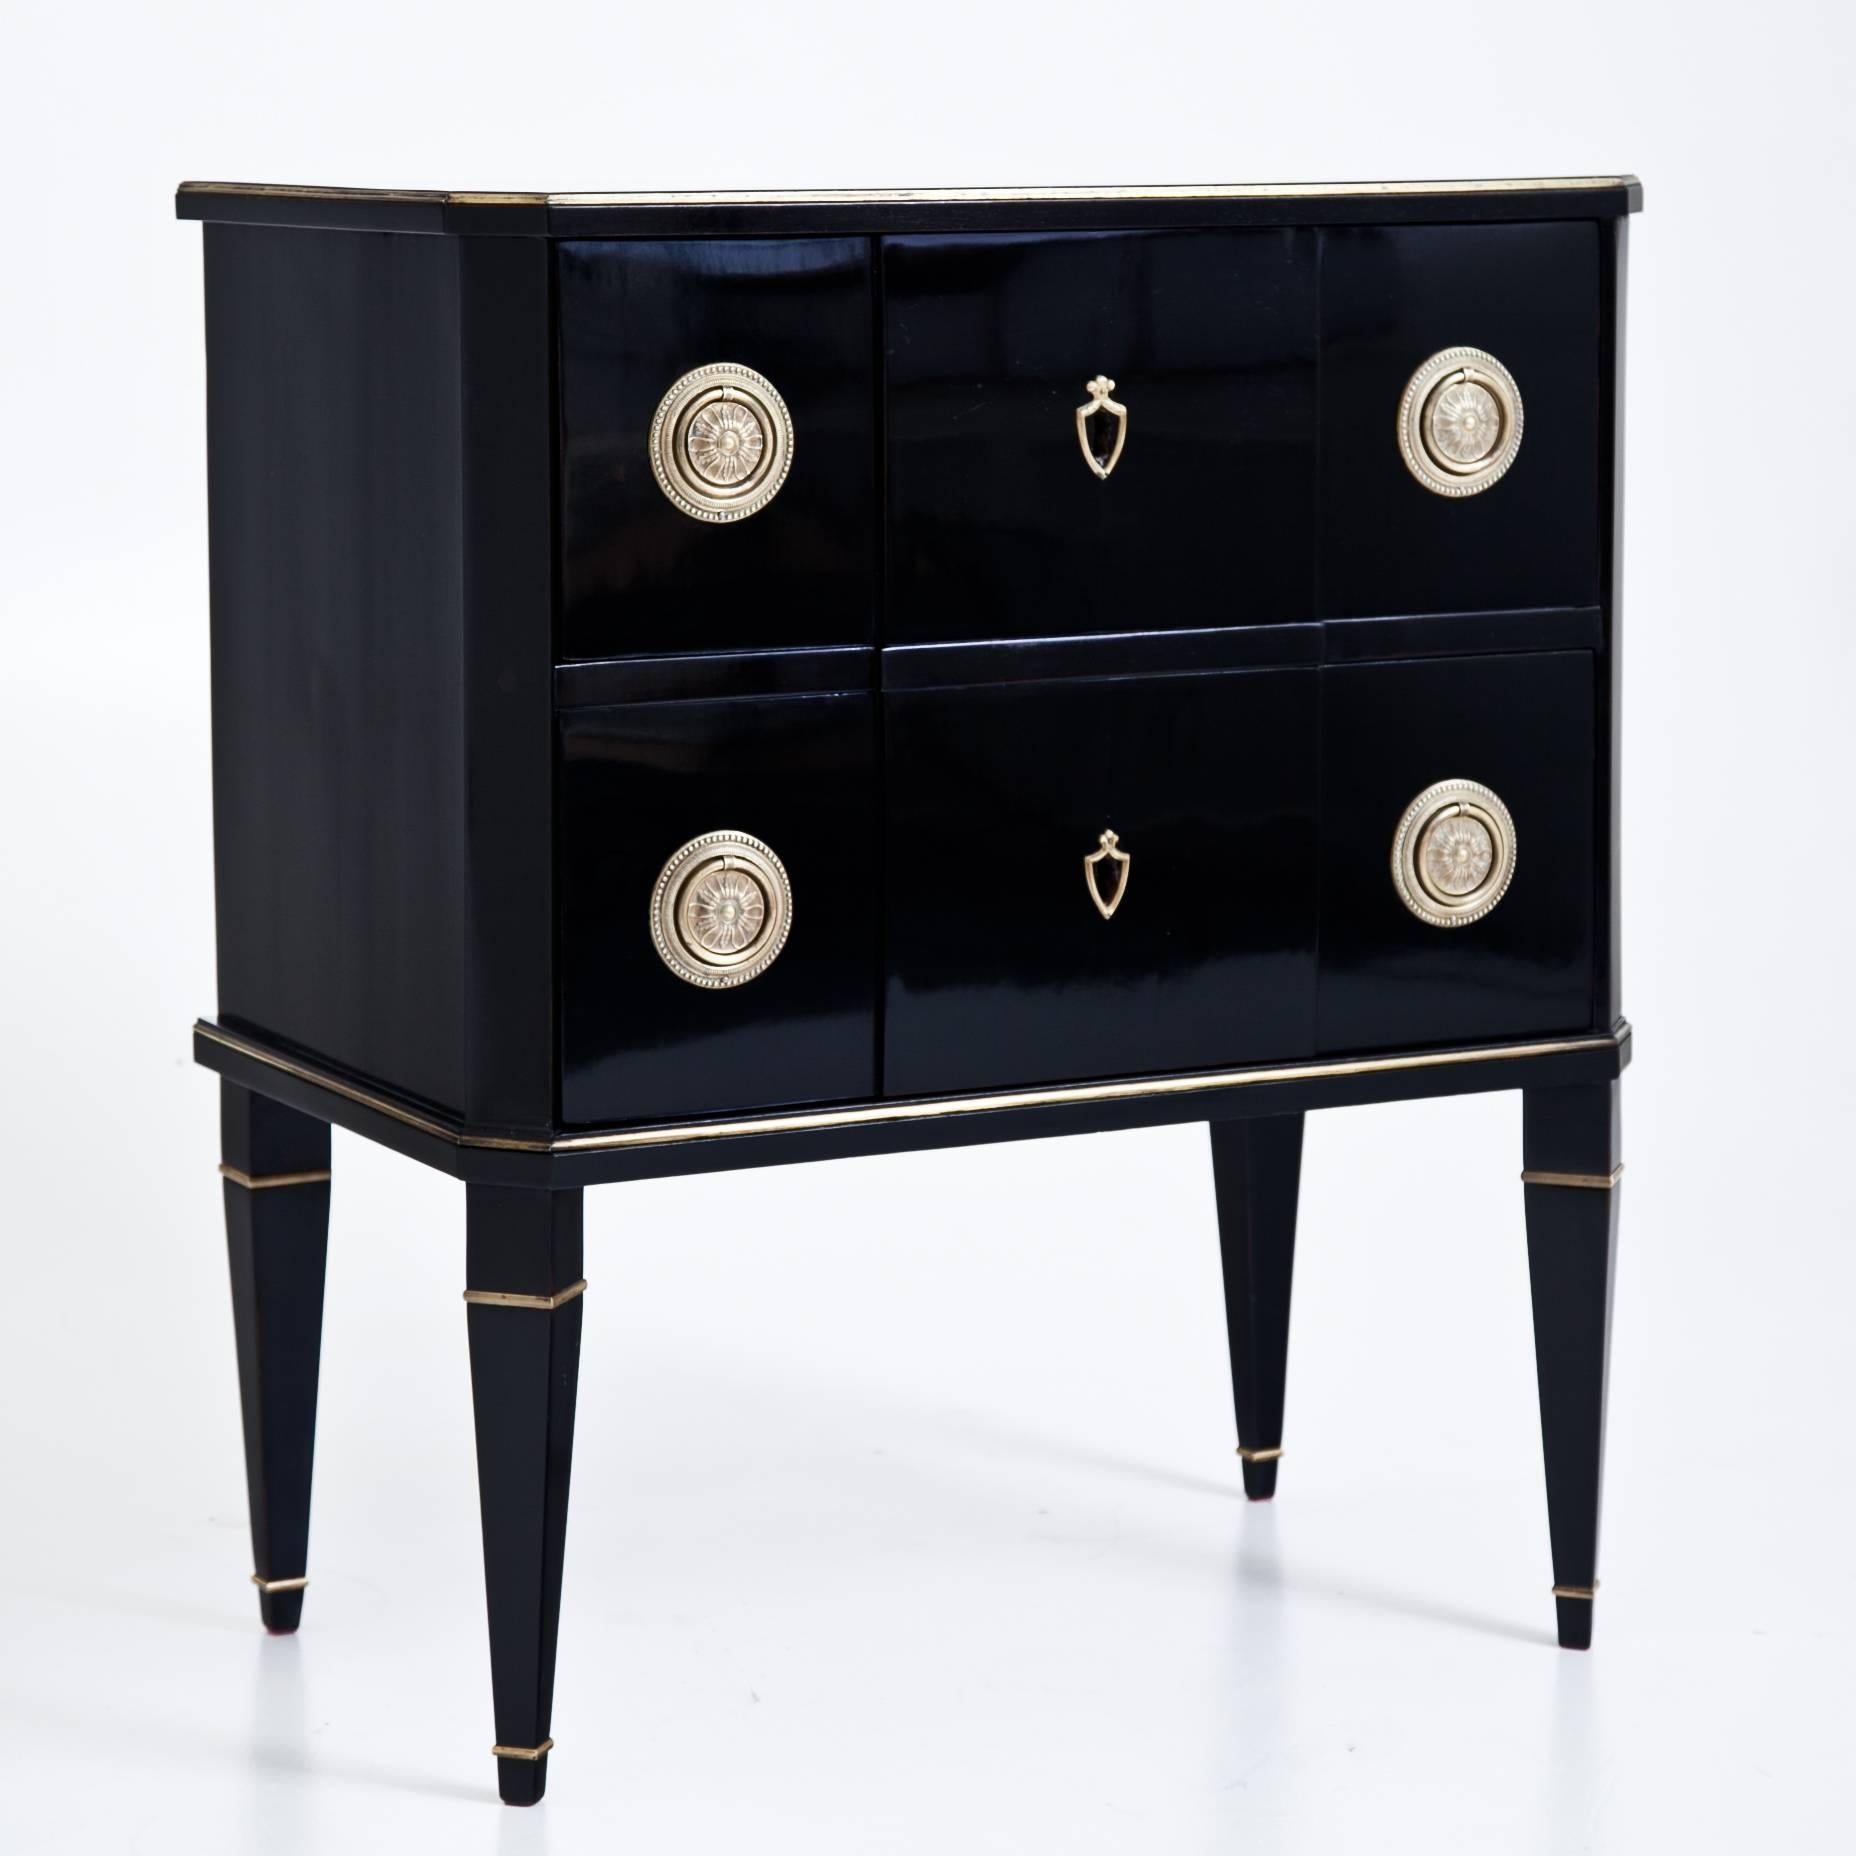 European Neoclassical Chest of Drawers, circa 1800